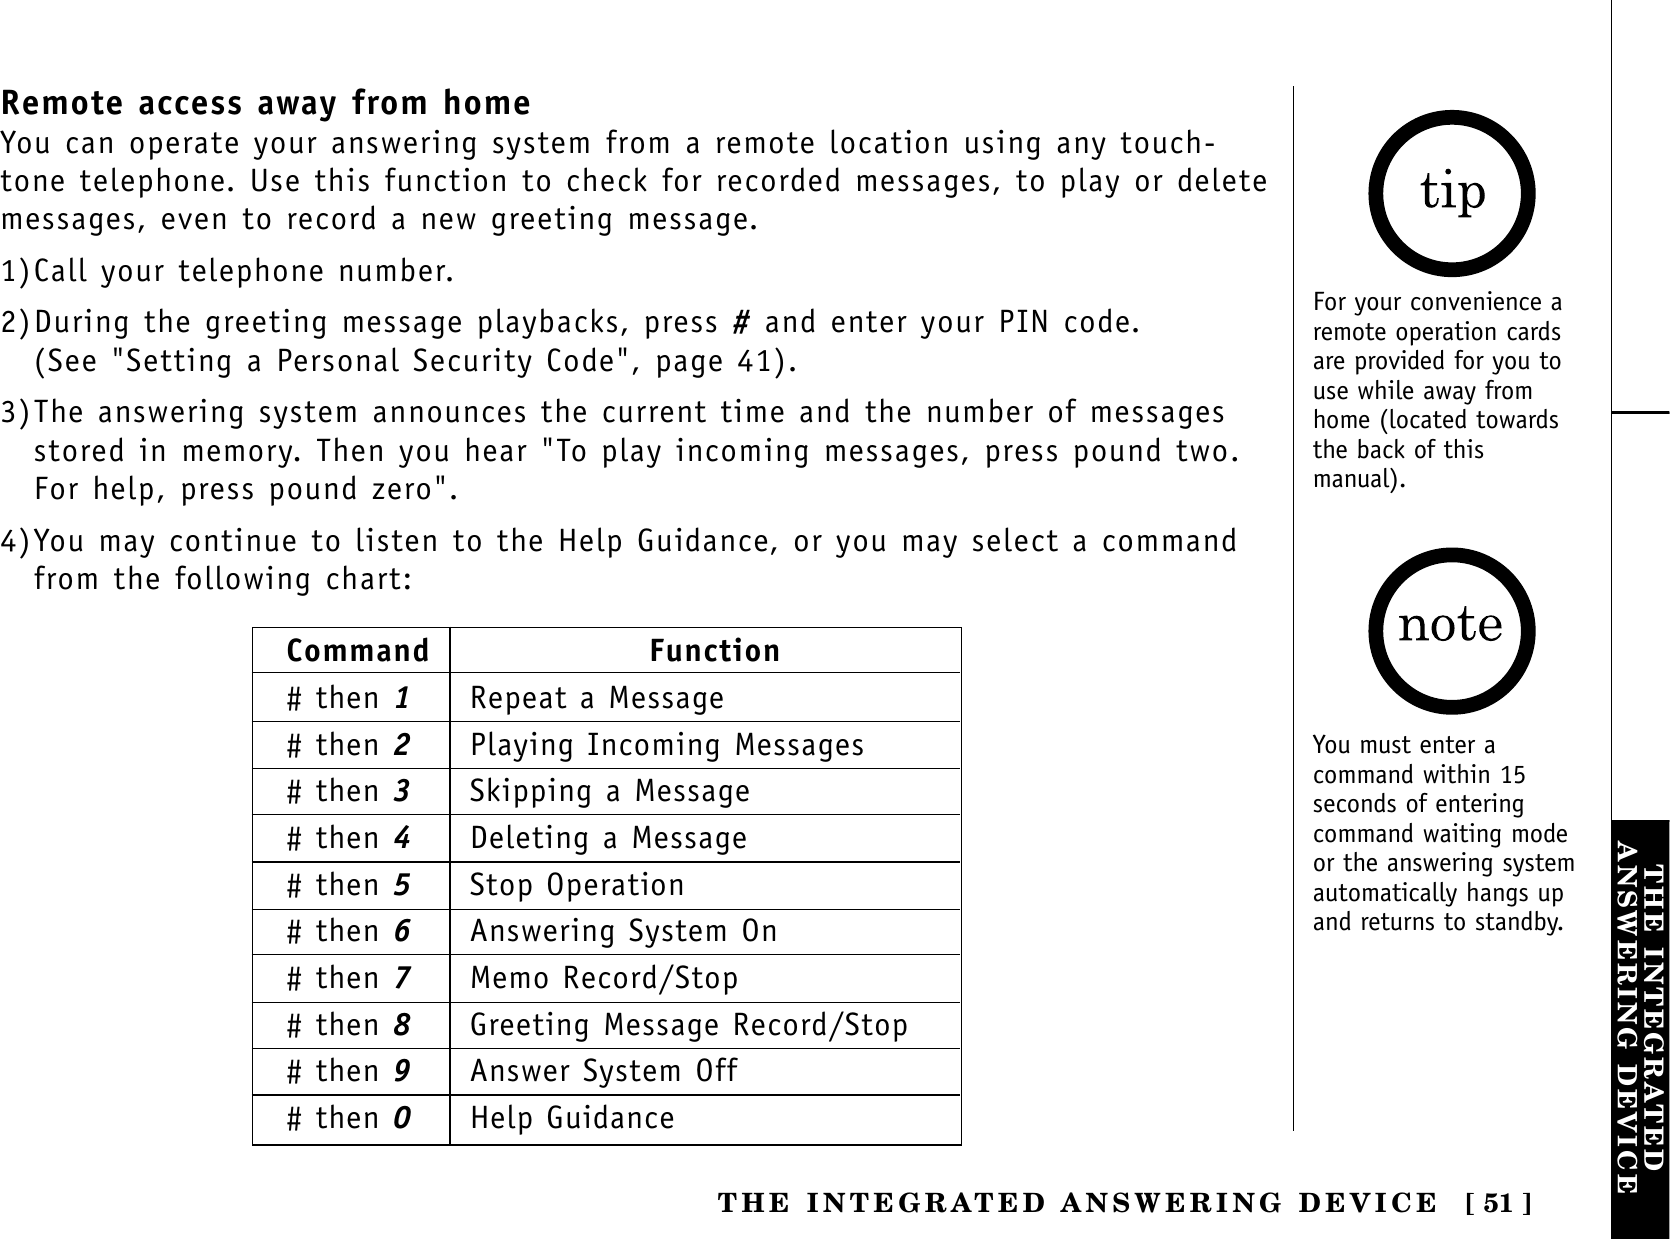 [ 51 ]THE INTEGRATEDANSWERING DEVICETHE INTEGRATED ANSWERING DEVICERemote access away from homeYou can operate your answering system from a remote location using any touch-tone telephone. Use this function to check for recorded messages, to play or deletemessages, even to record a new greeting message.1)Call your telephone number.2)During the greeting message playbacks, press #and enter your PIN code. (See &quot;Setting a Personal Security Code&quot;, page 41).3)The answering system announces the current time and the number of messagesstored in memory. Then you hear &quot;To play incoming messages, press pound two.For help, press pound zero&quot;.4)You may continue to listen to the Help Guidance, or you may select a commandfrom the following chart:For your convenience aremote operation cardsare provided for you touse while away fromhome (located towardsthe back of thismanual).Command Function# then 1Repeat a Message# then 2Playing Incoming Messages# then 3Skipping a Message# then 4Deleting a Message# then 5Stop Operation# then 6Answering System On# then 7Memo Record/Stop# then 8Greeting Message Record/Stop# then 9Answer System Off# then 0Help GuidanceYou must enter acommand within 15seconds of enteringcommand waiting modeor the answering systemautomatically hangs upand returns to standby.